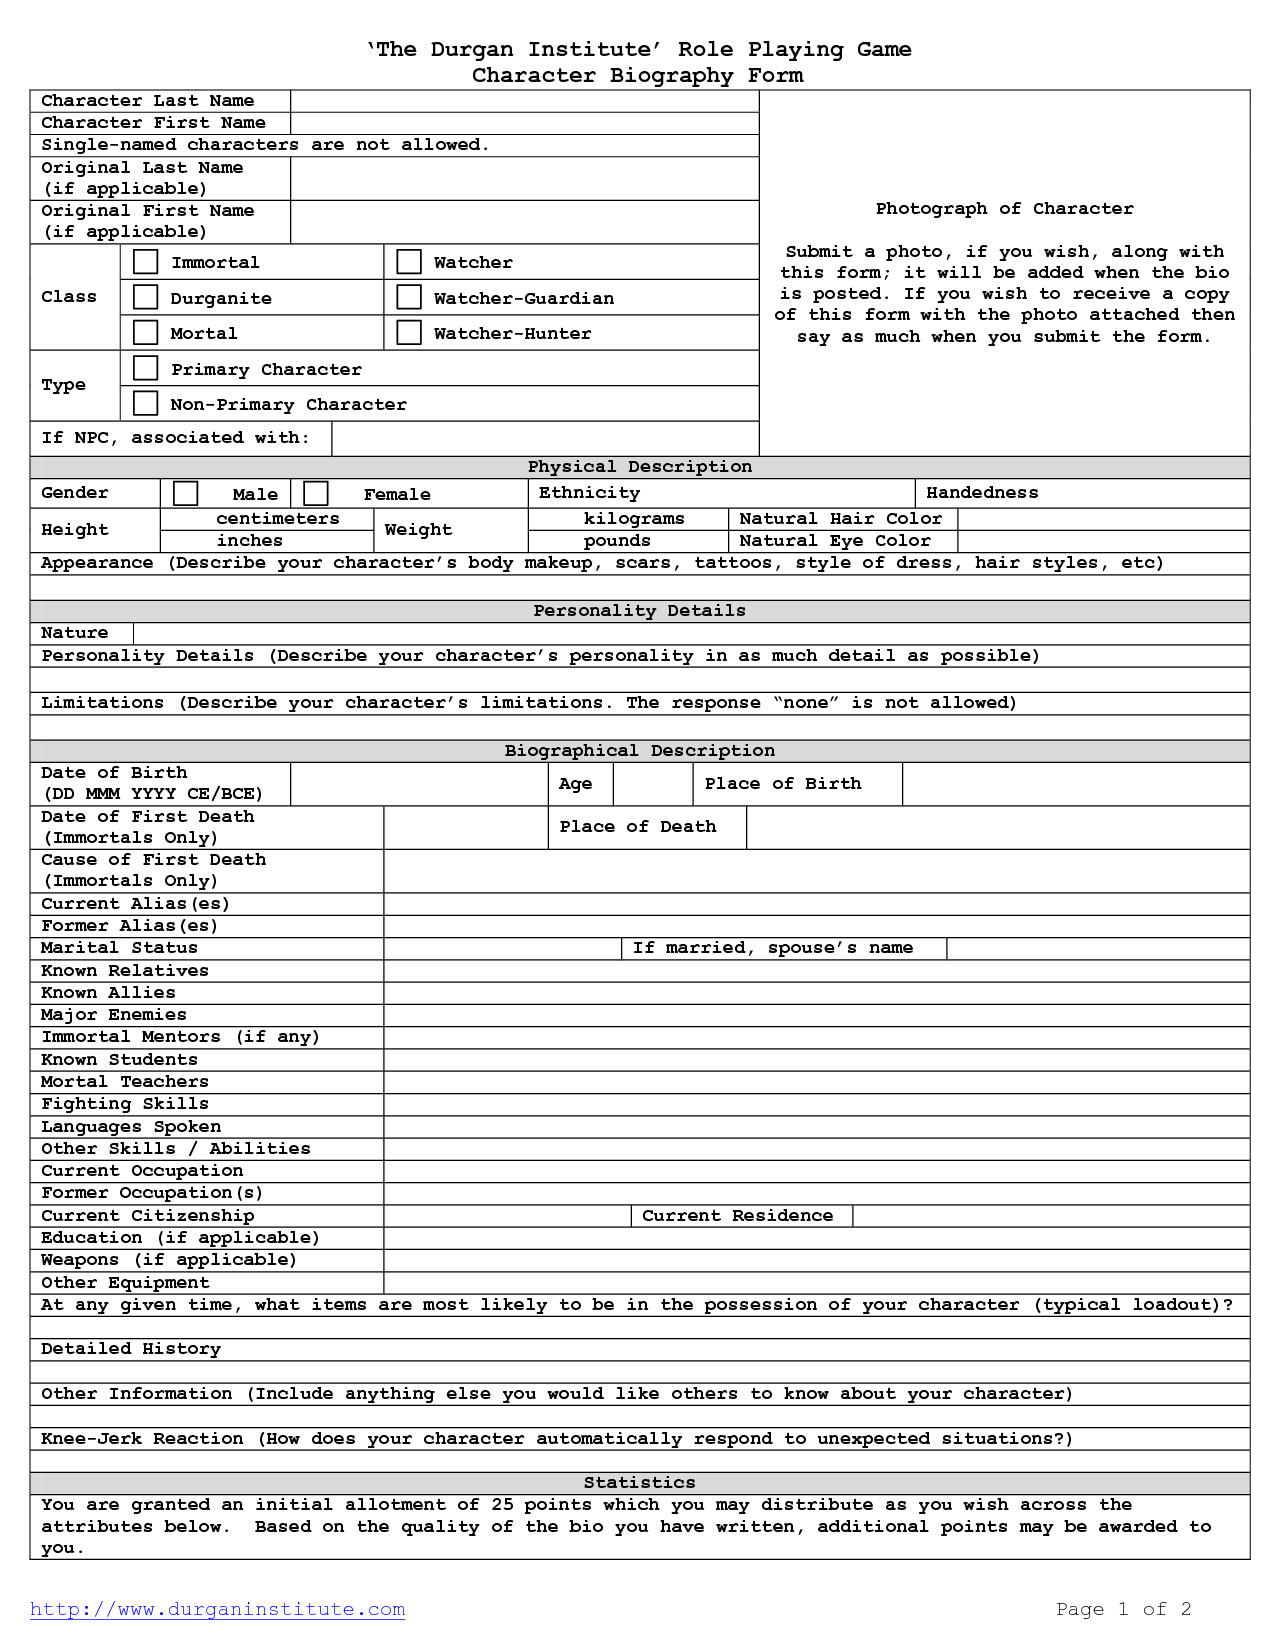 Simple Character Bio Template Character Bio Template